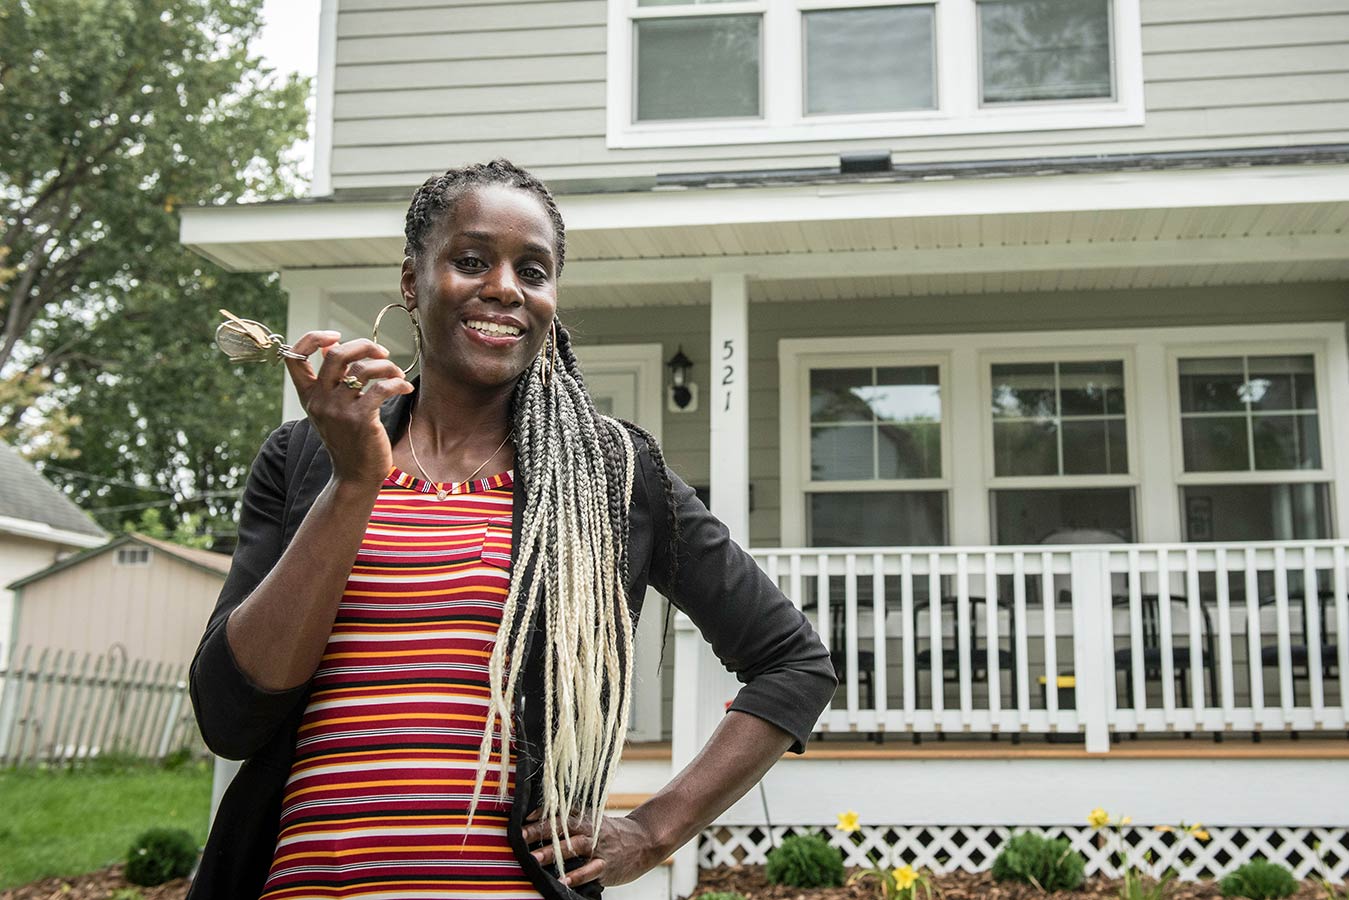 LeAndra-smiling-in-front-of-her-house-with-keys-in-hand---donate-page-2